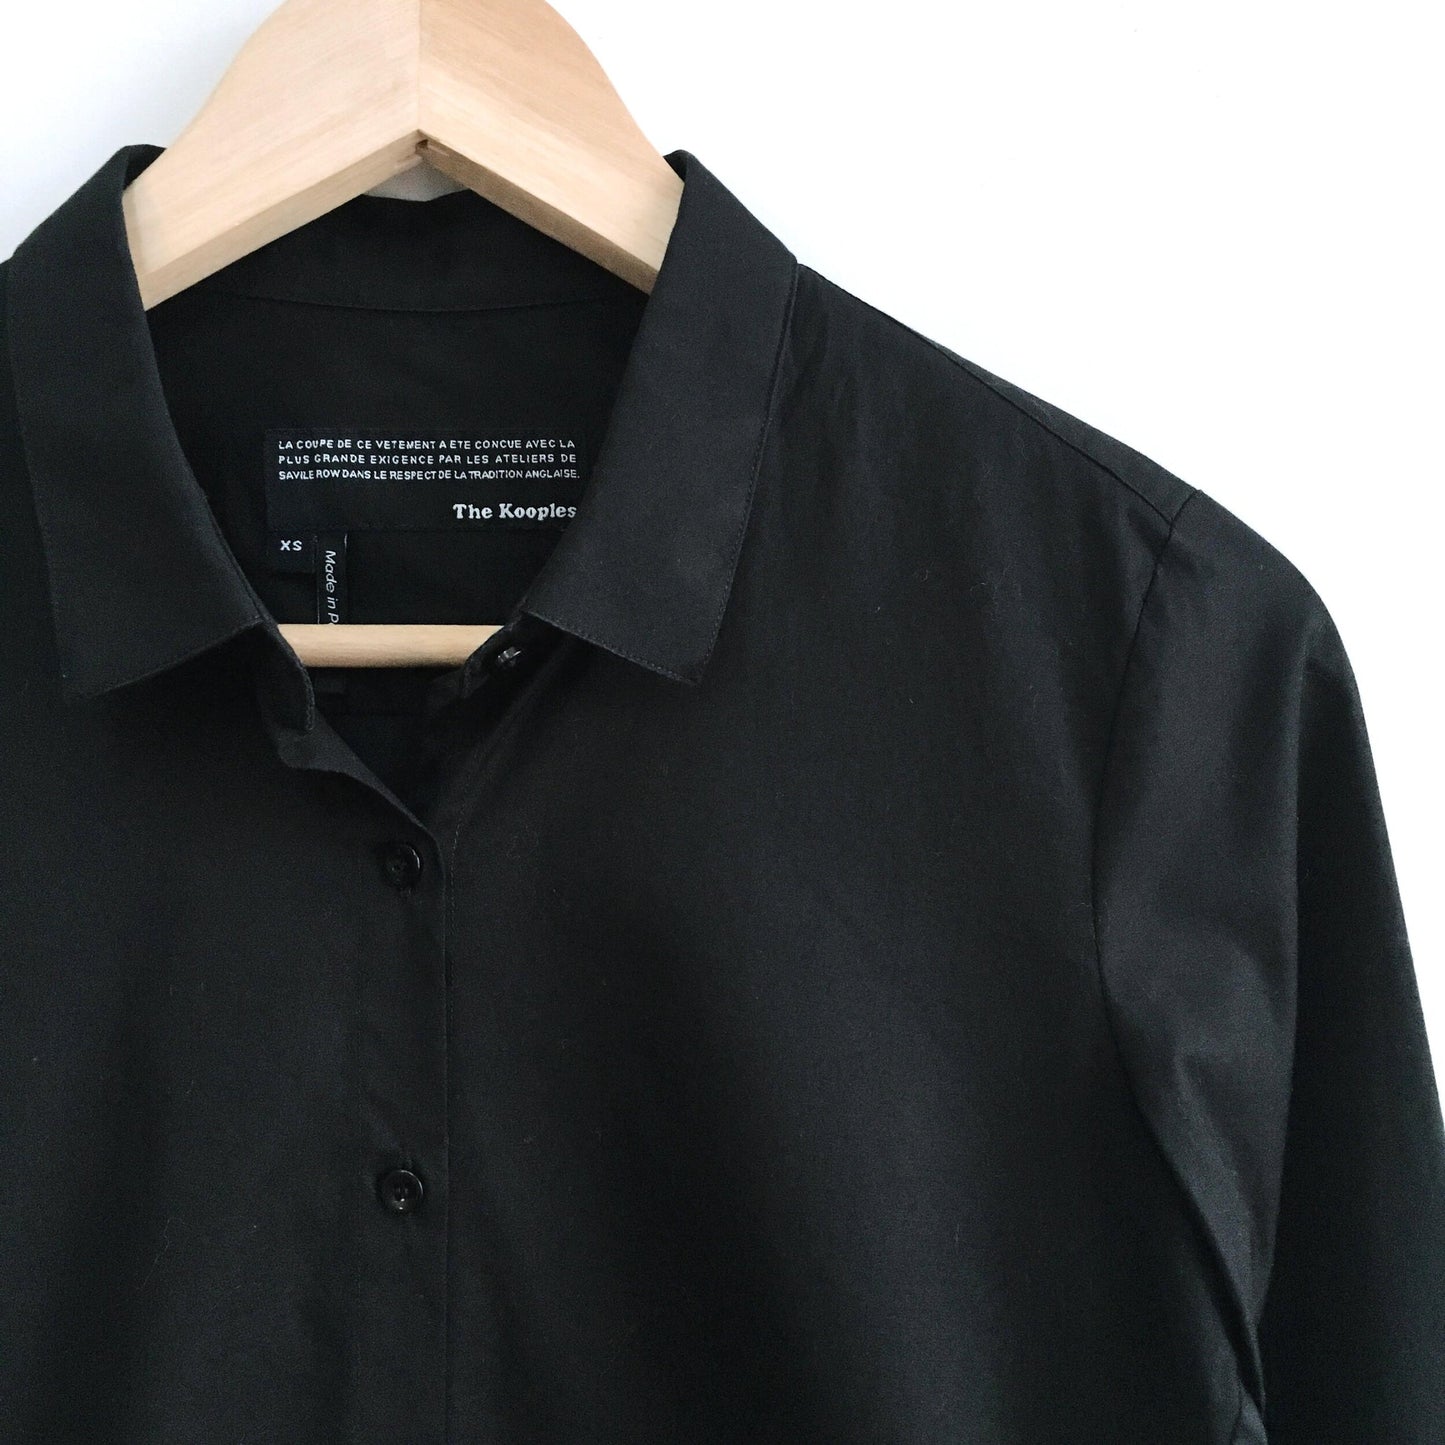 The Kooples Noir Fitted Shirt - size xs